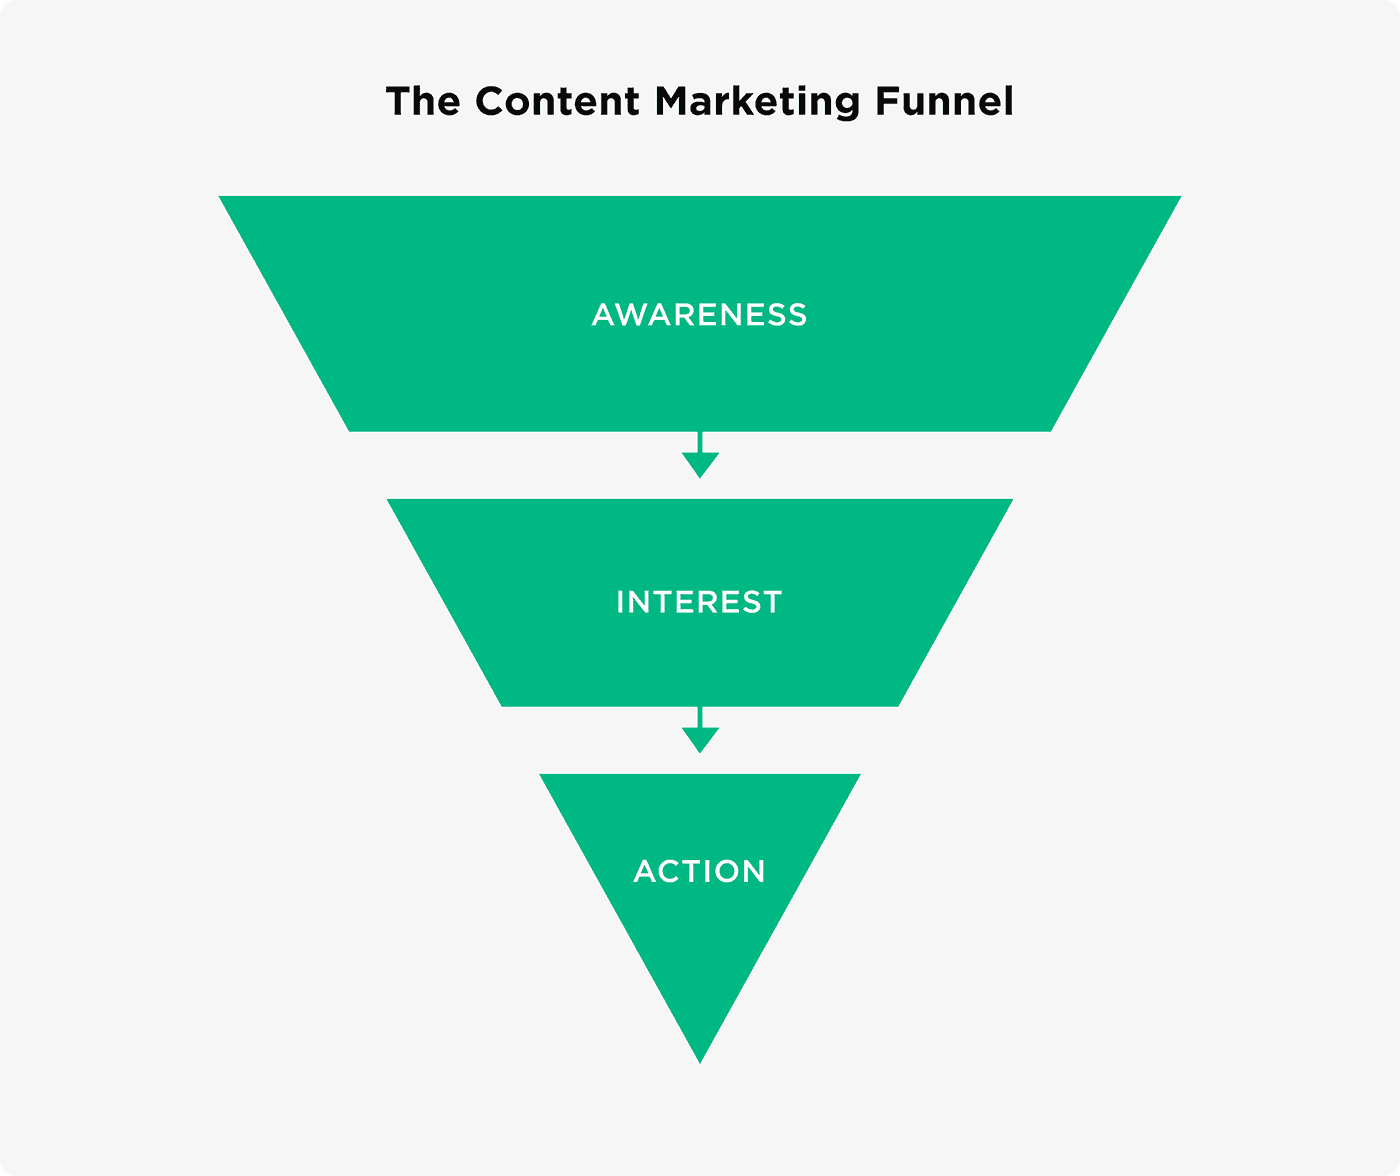 The content marketing funnel